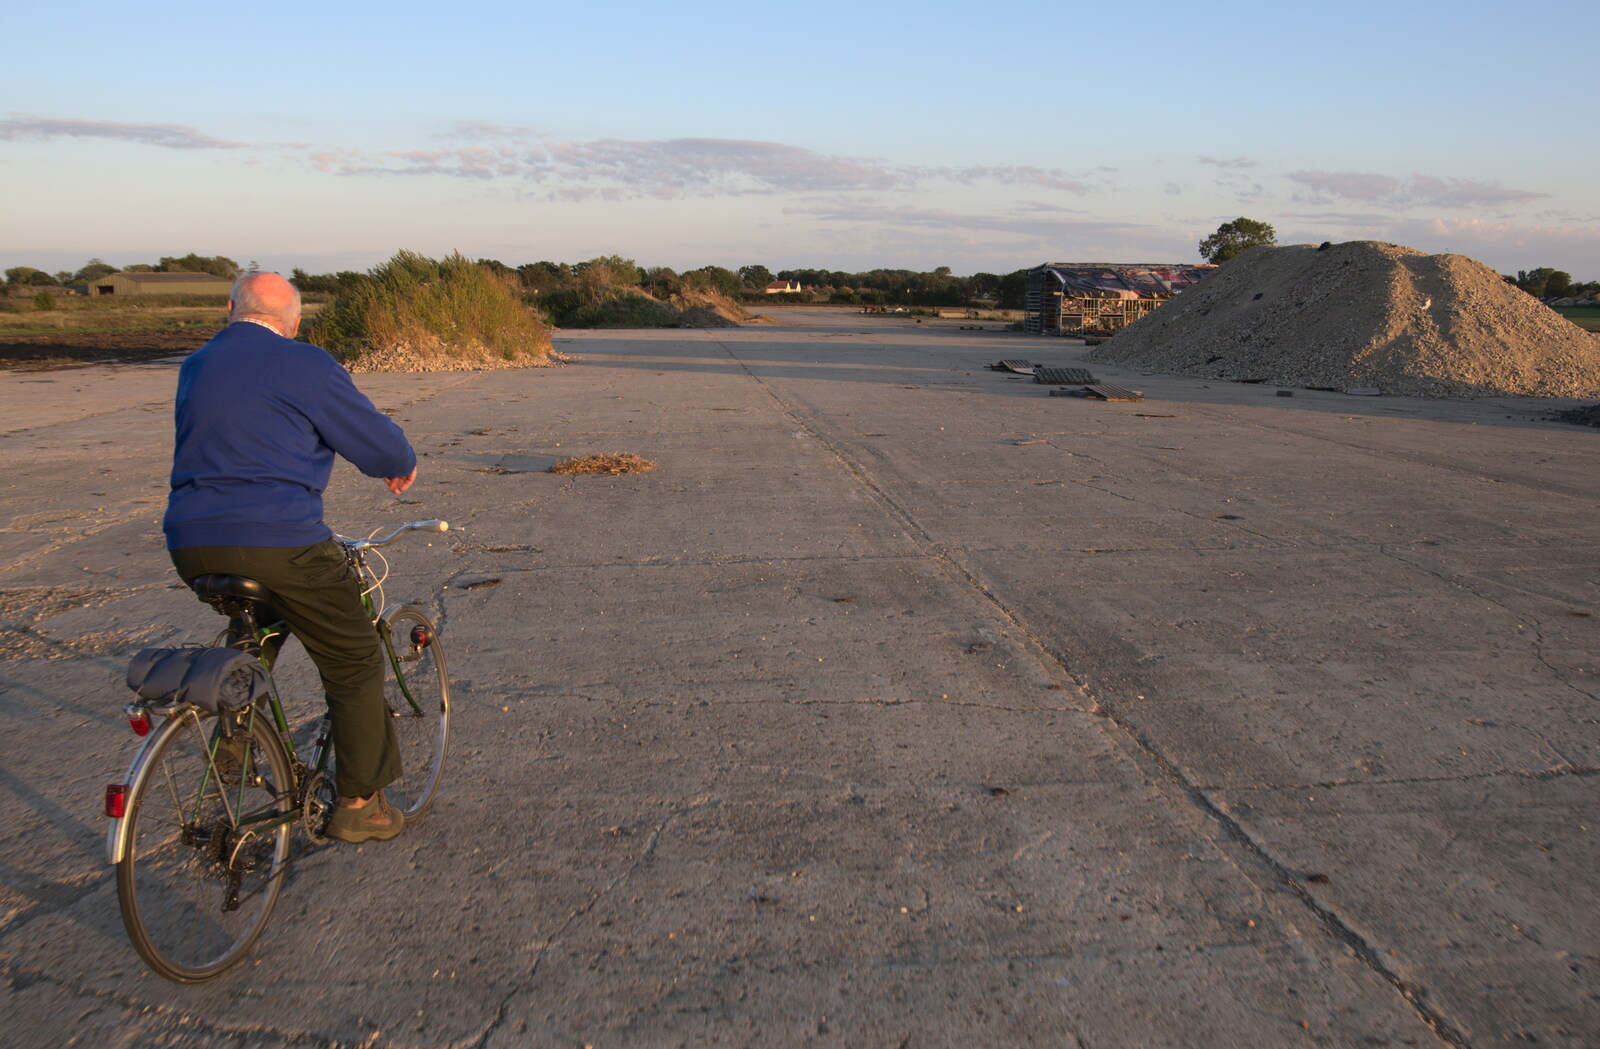 Mick cycles around on the airfield concrete from Cycling Eye Airfield and Station 119, Eye, Suffolk - 9th September 2020